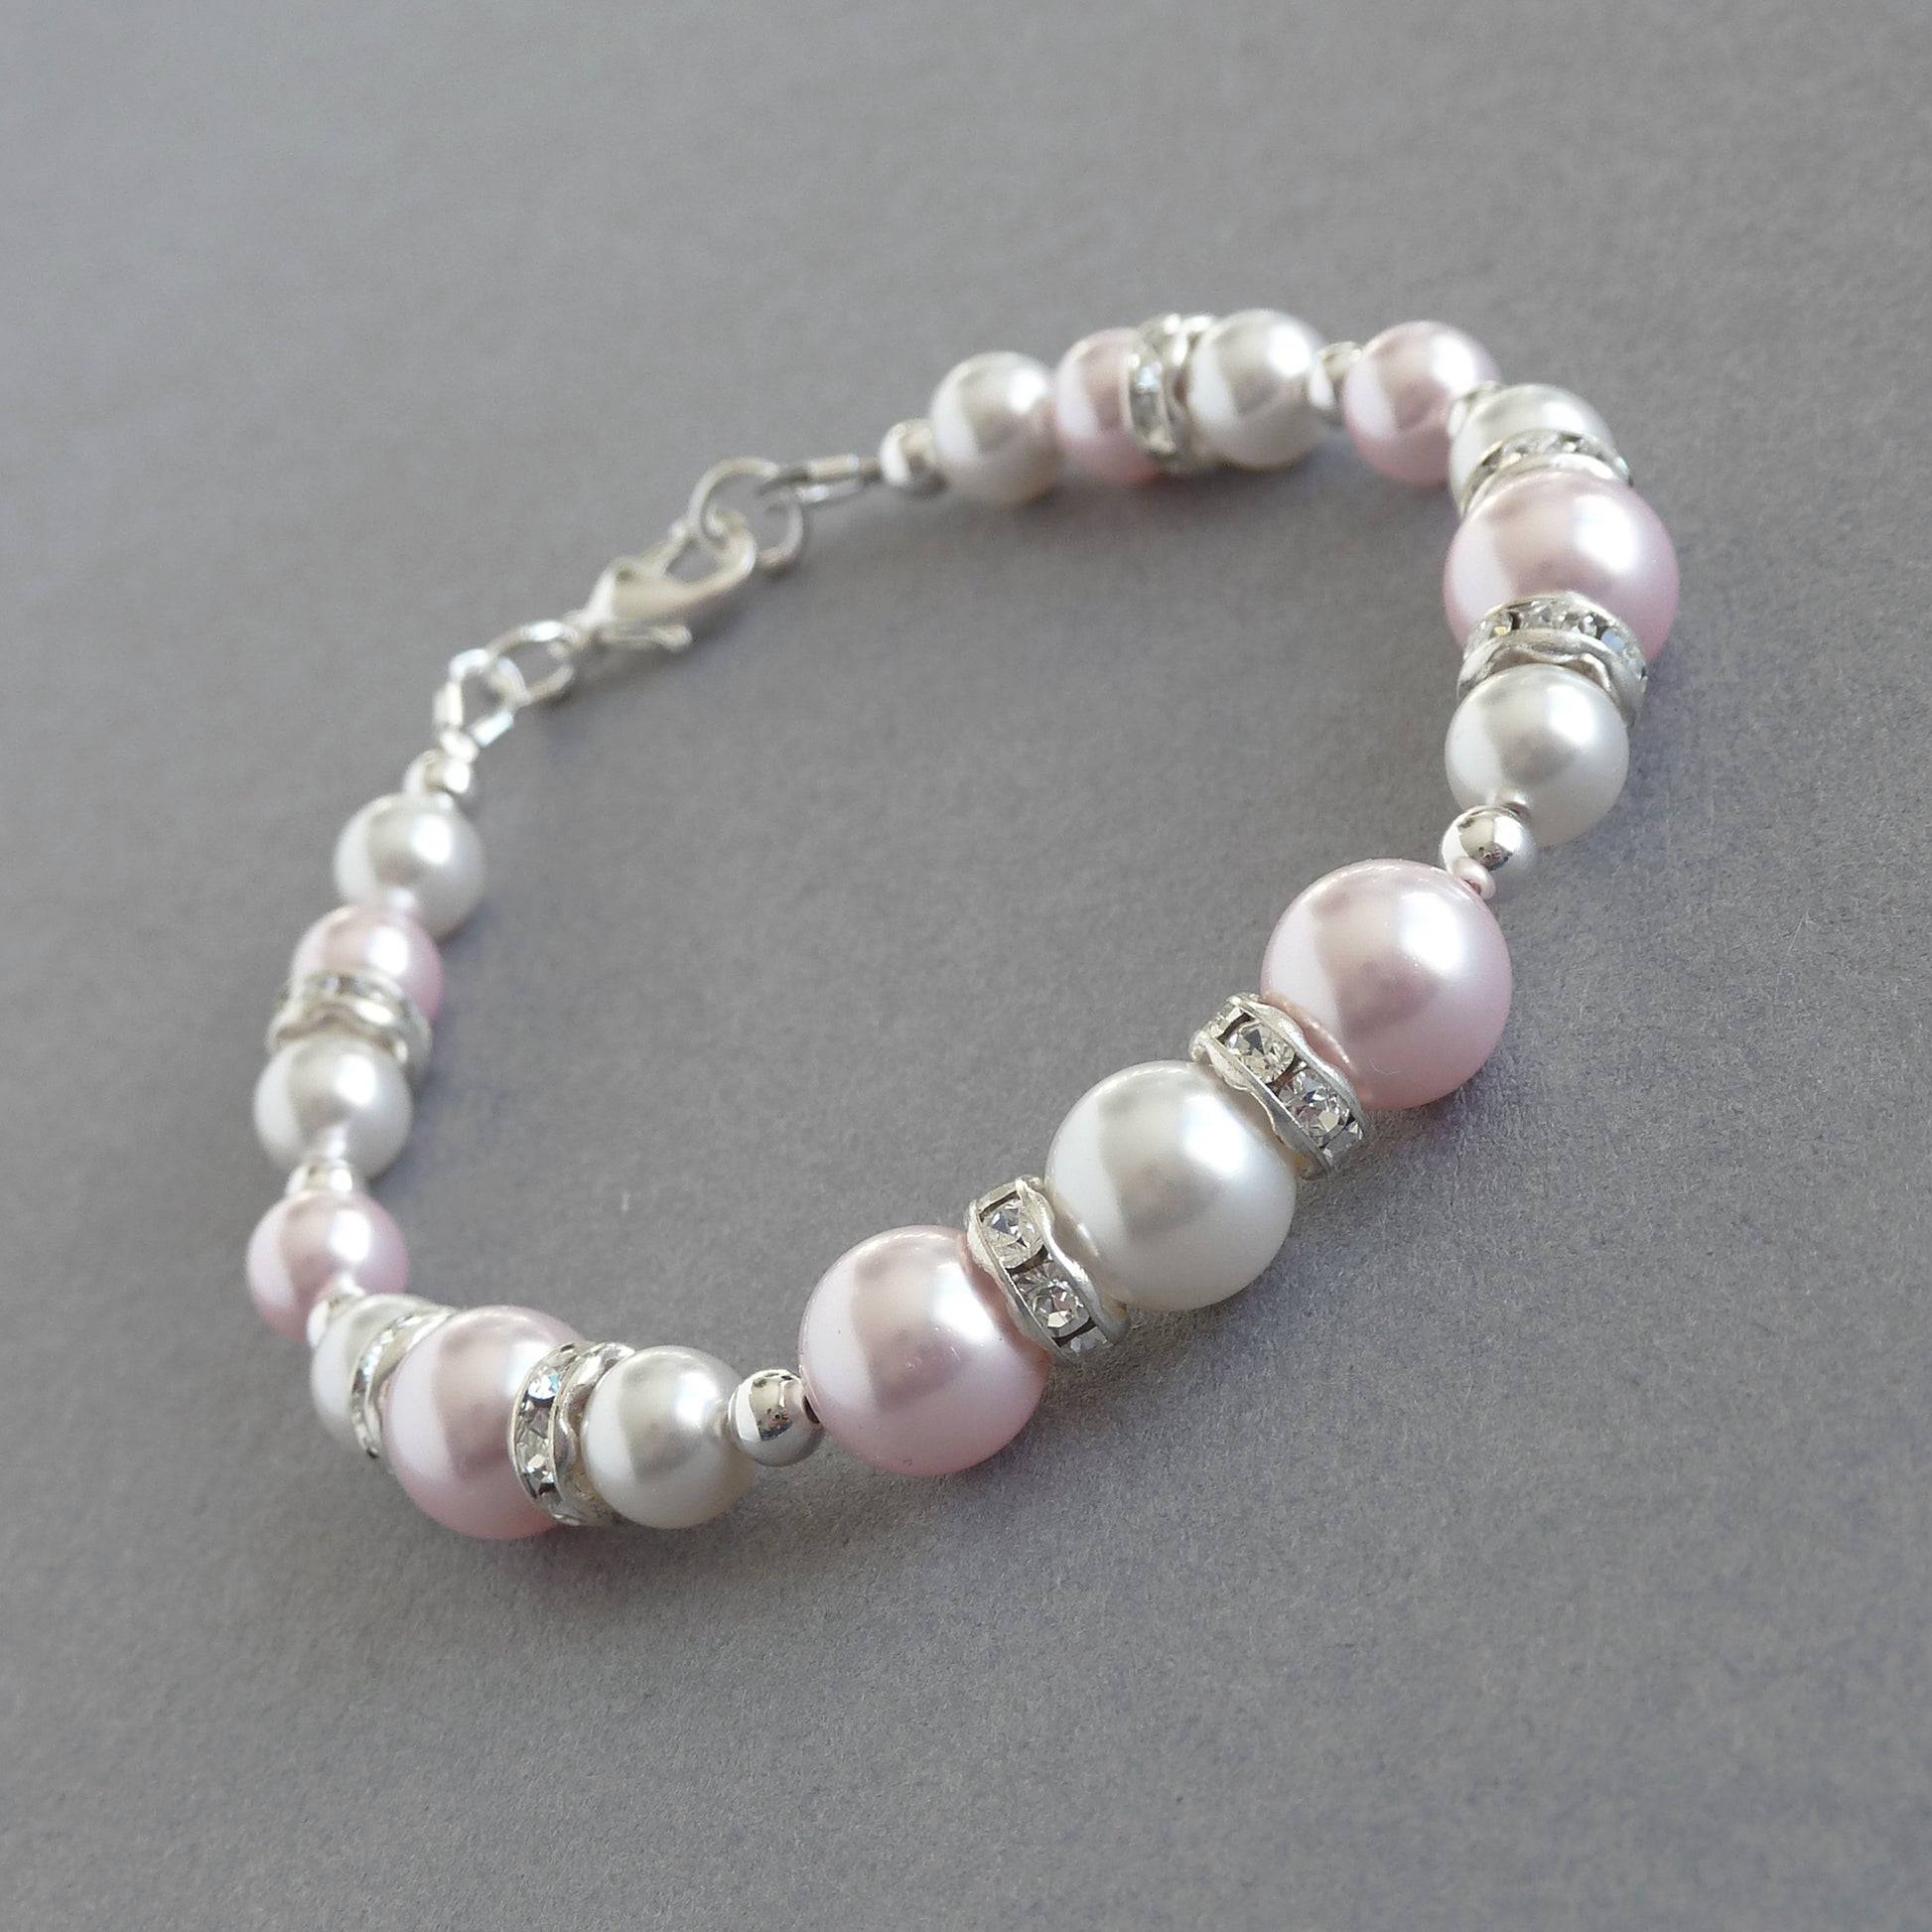 Baby pink pearl and crystal bracelet